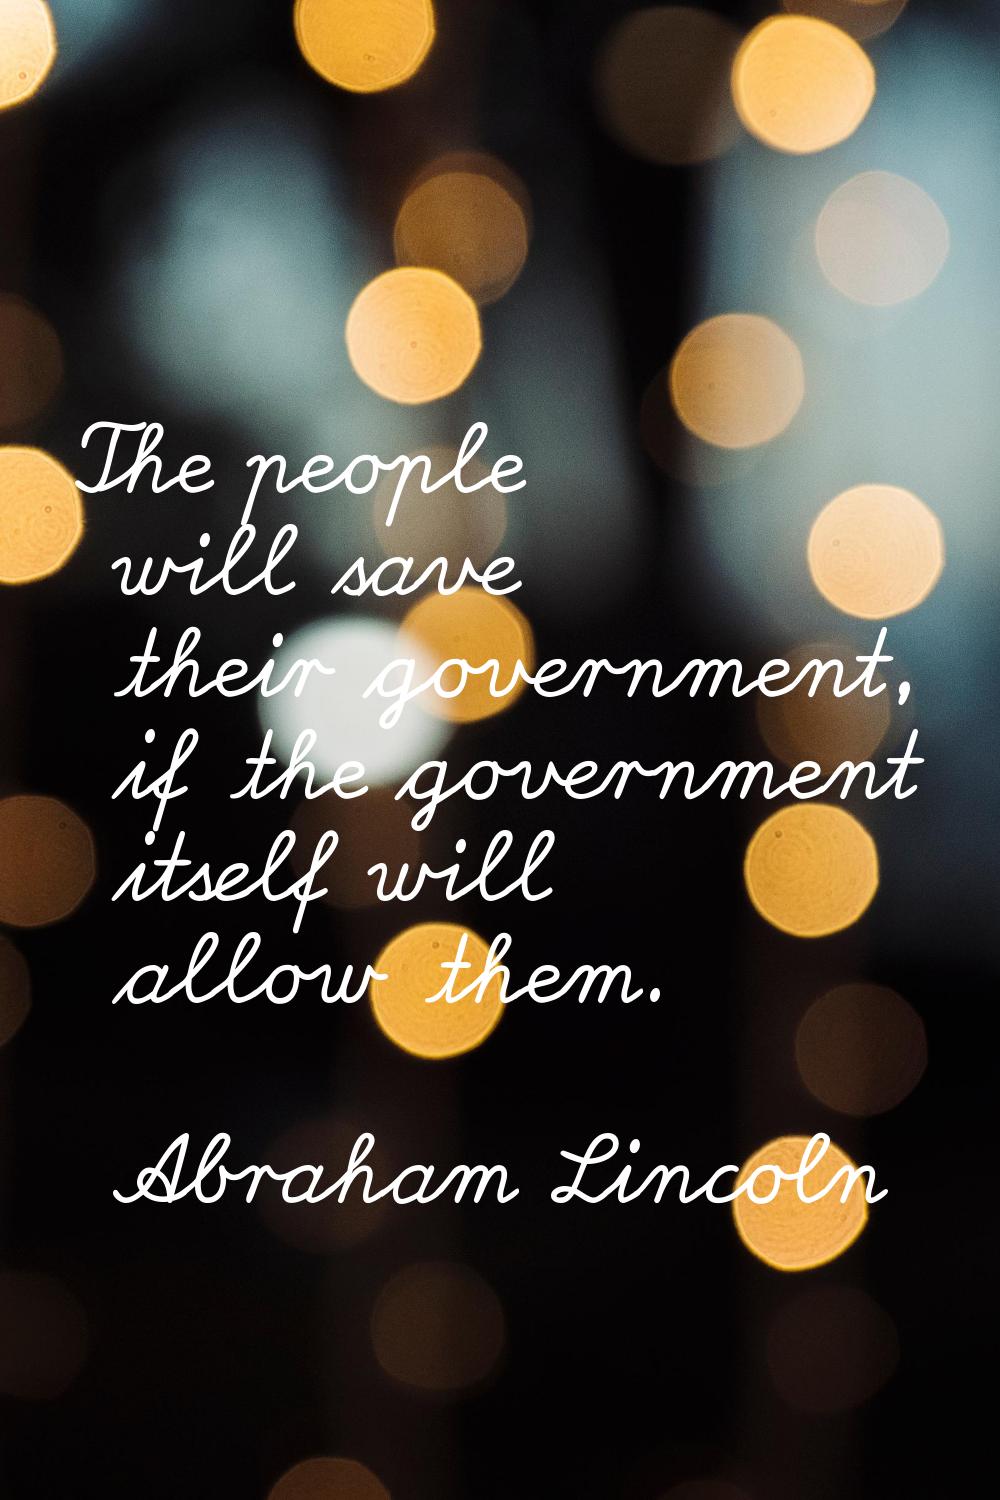 The people will save their government, if the government itself will allow them.